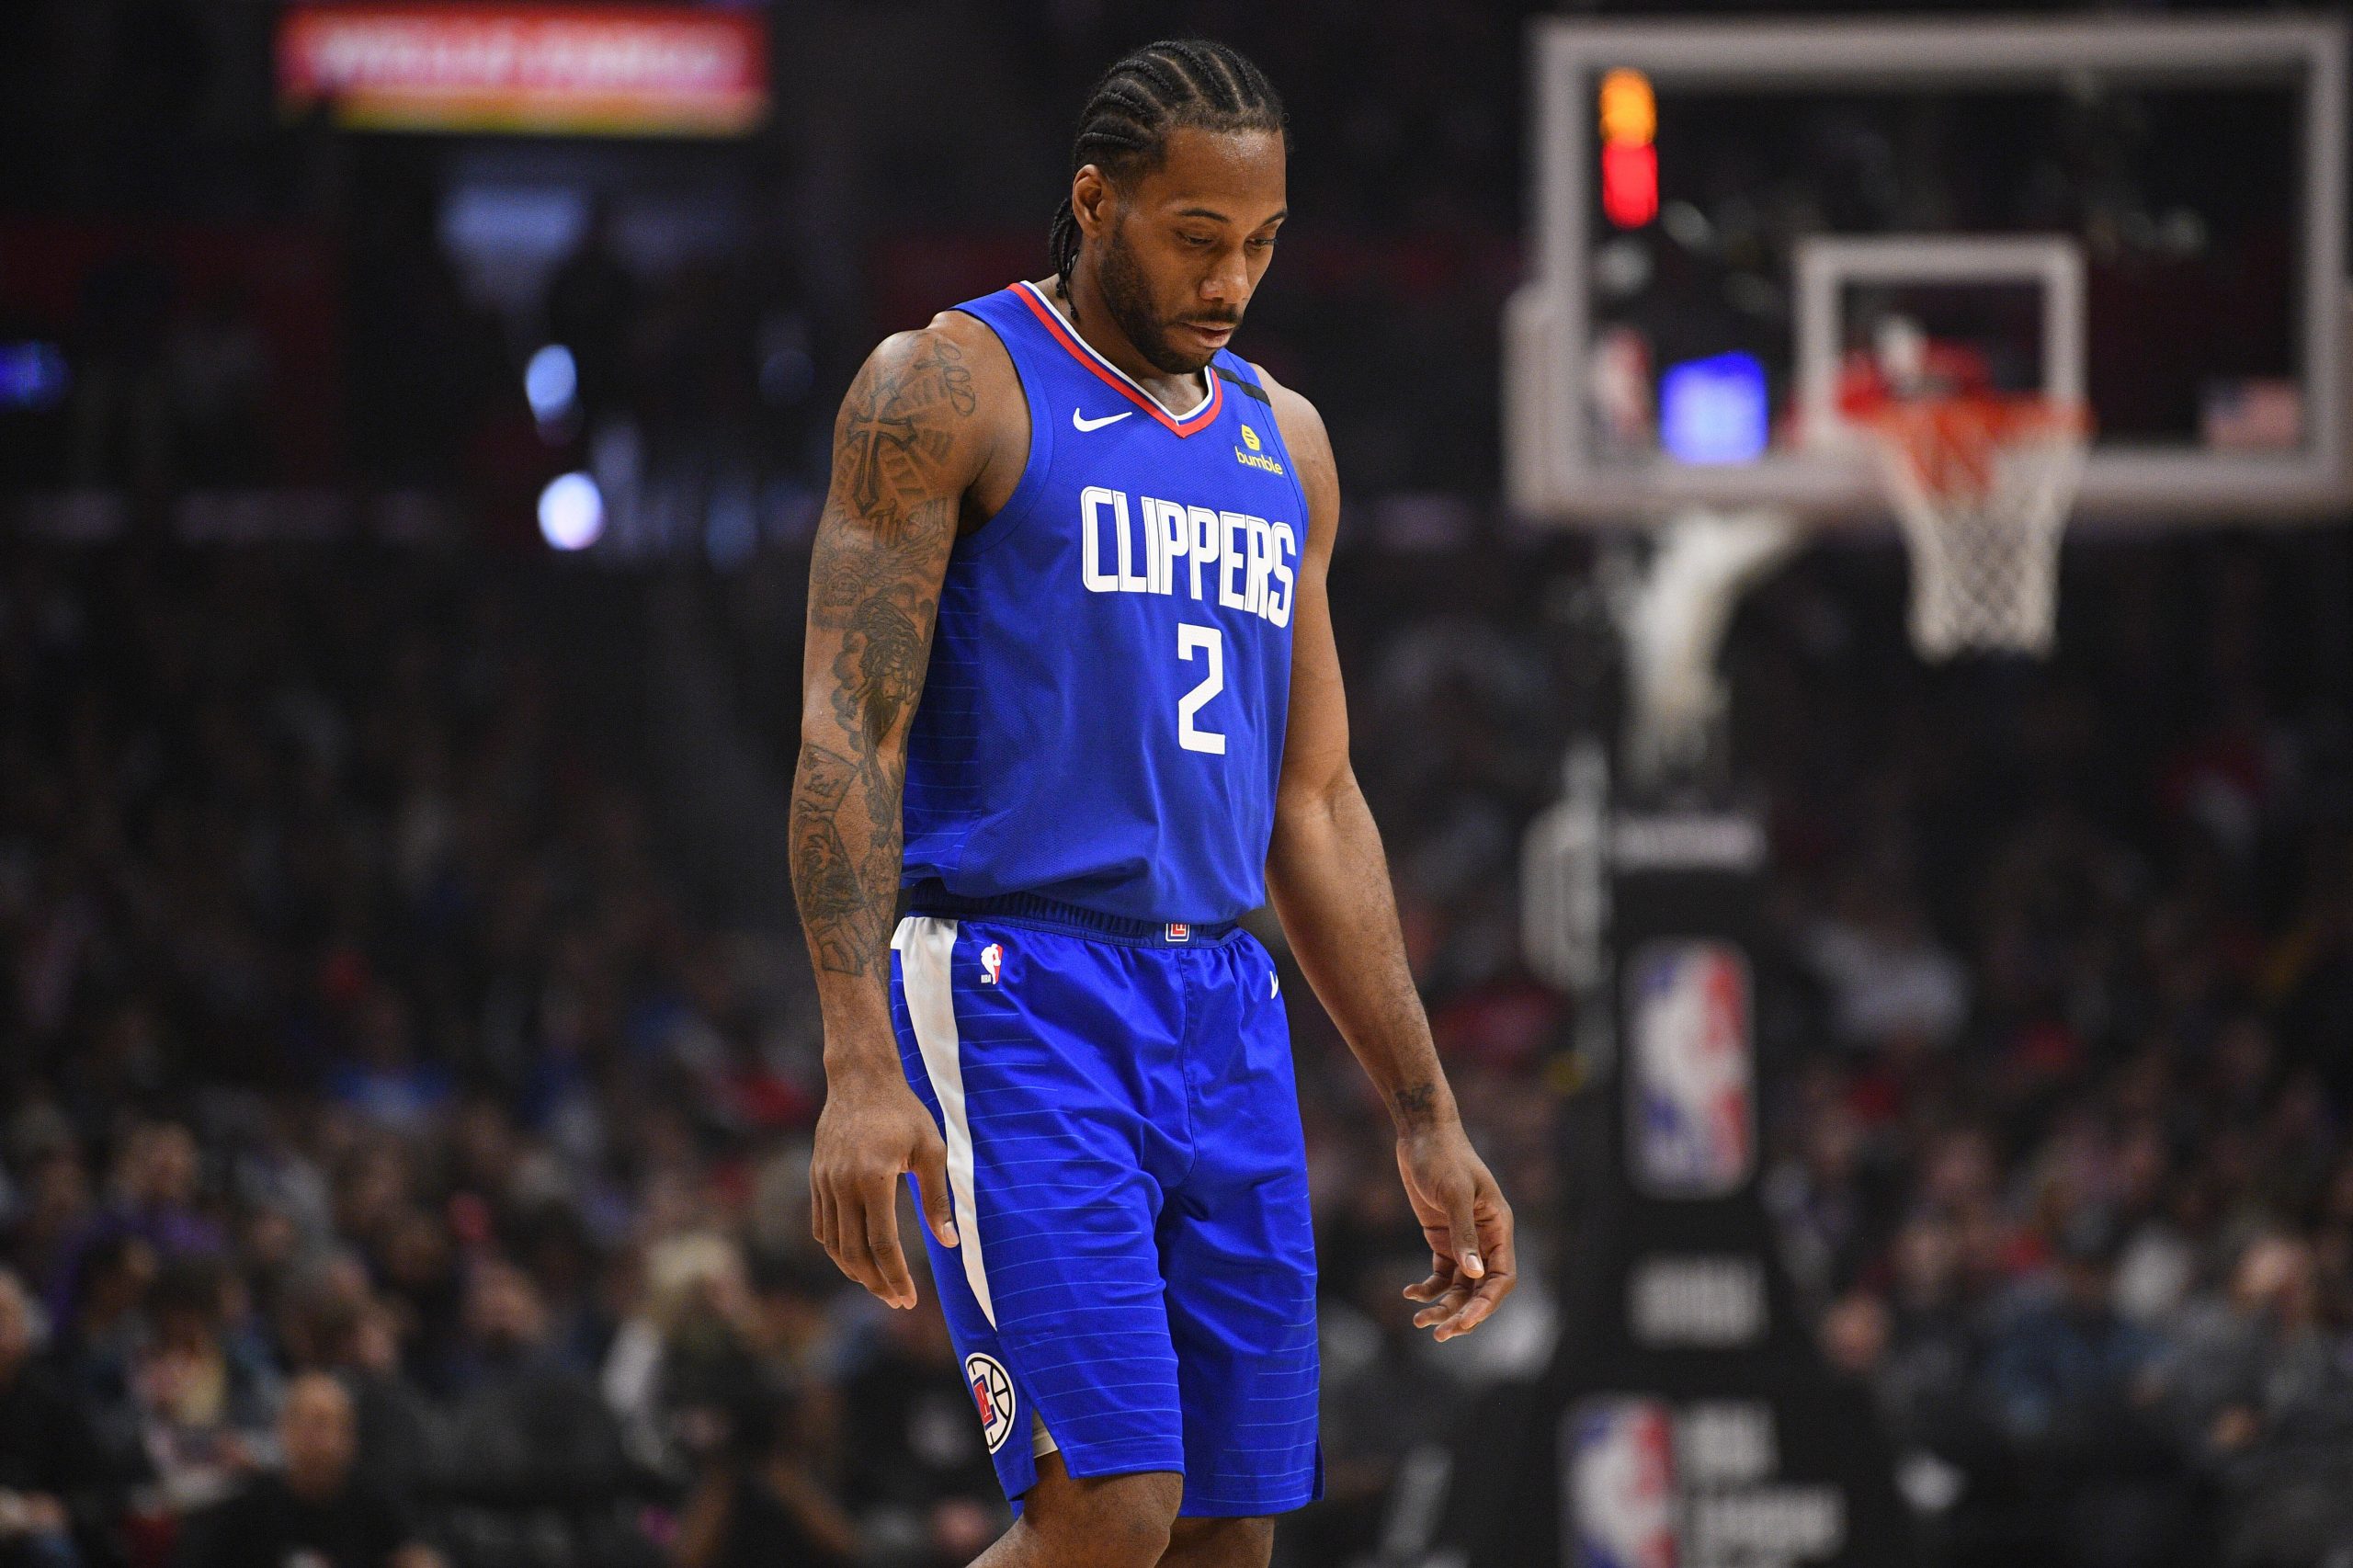 Kawhi sat out all of last year hoping to come back his old self this year”  – Former NBA champion discusses importance of Kawhi Leonard for Clippers